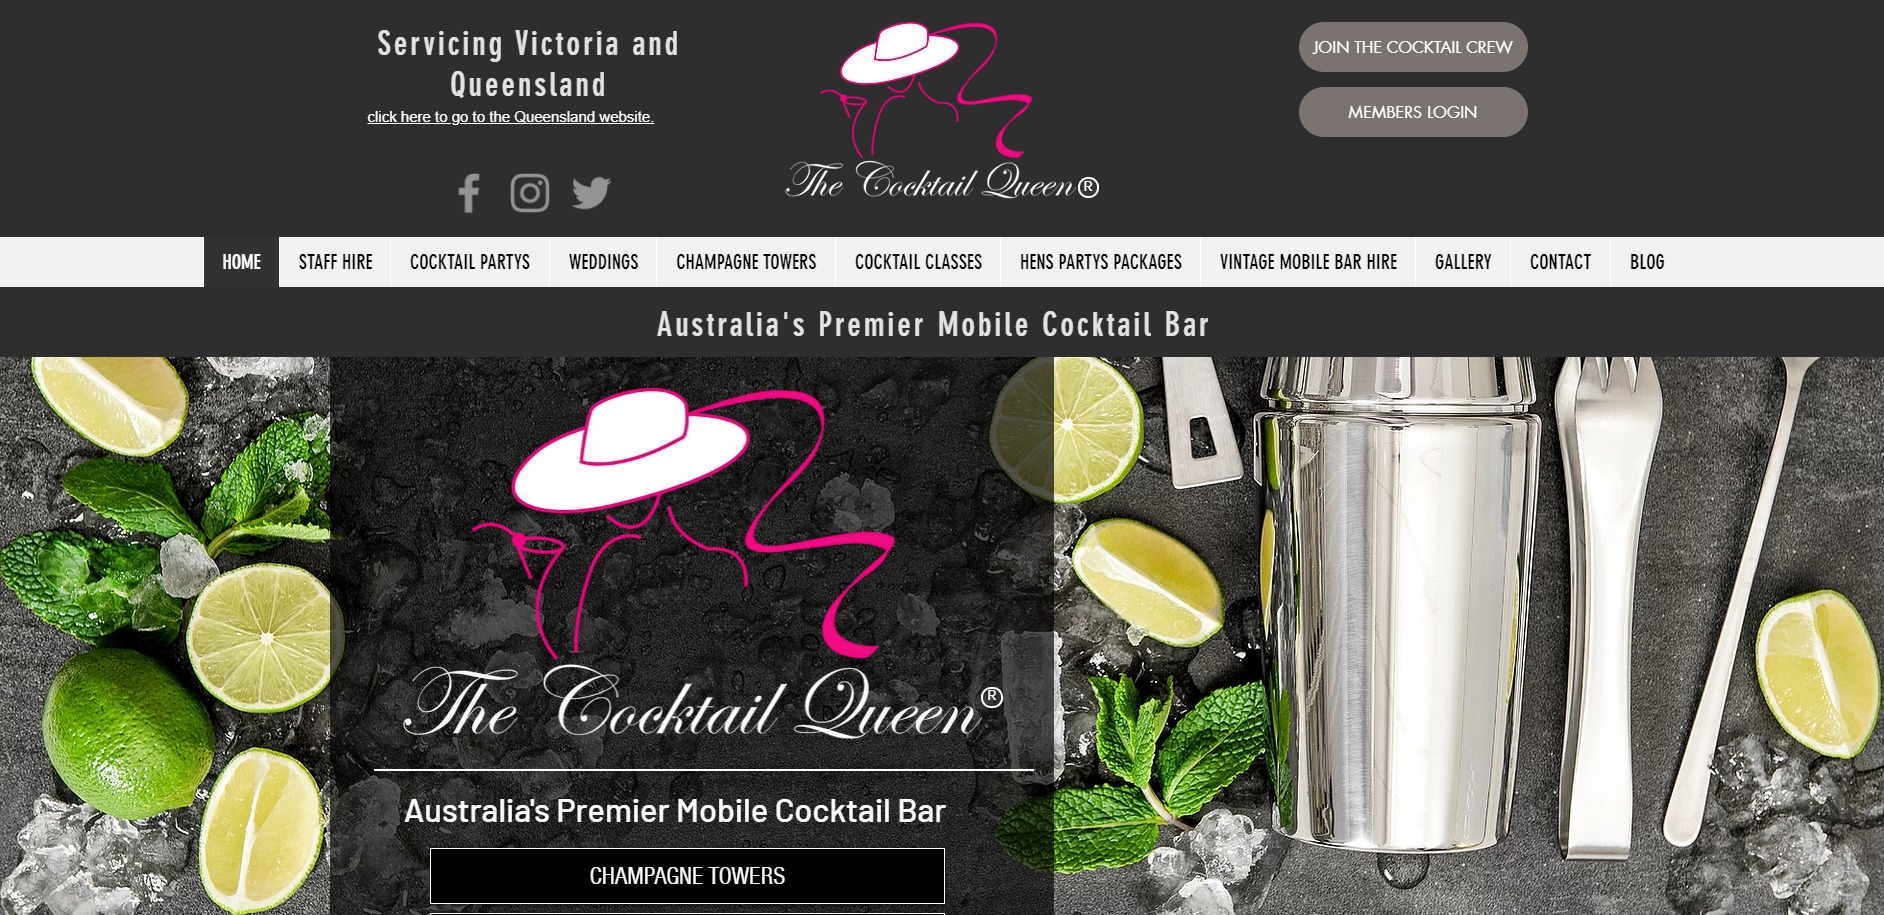 The Cocktail Queen